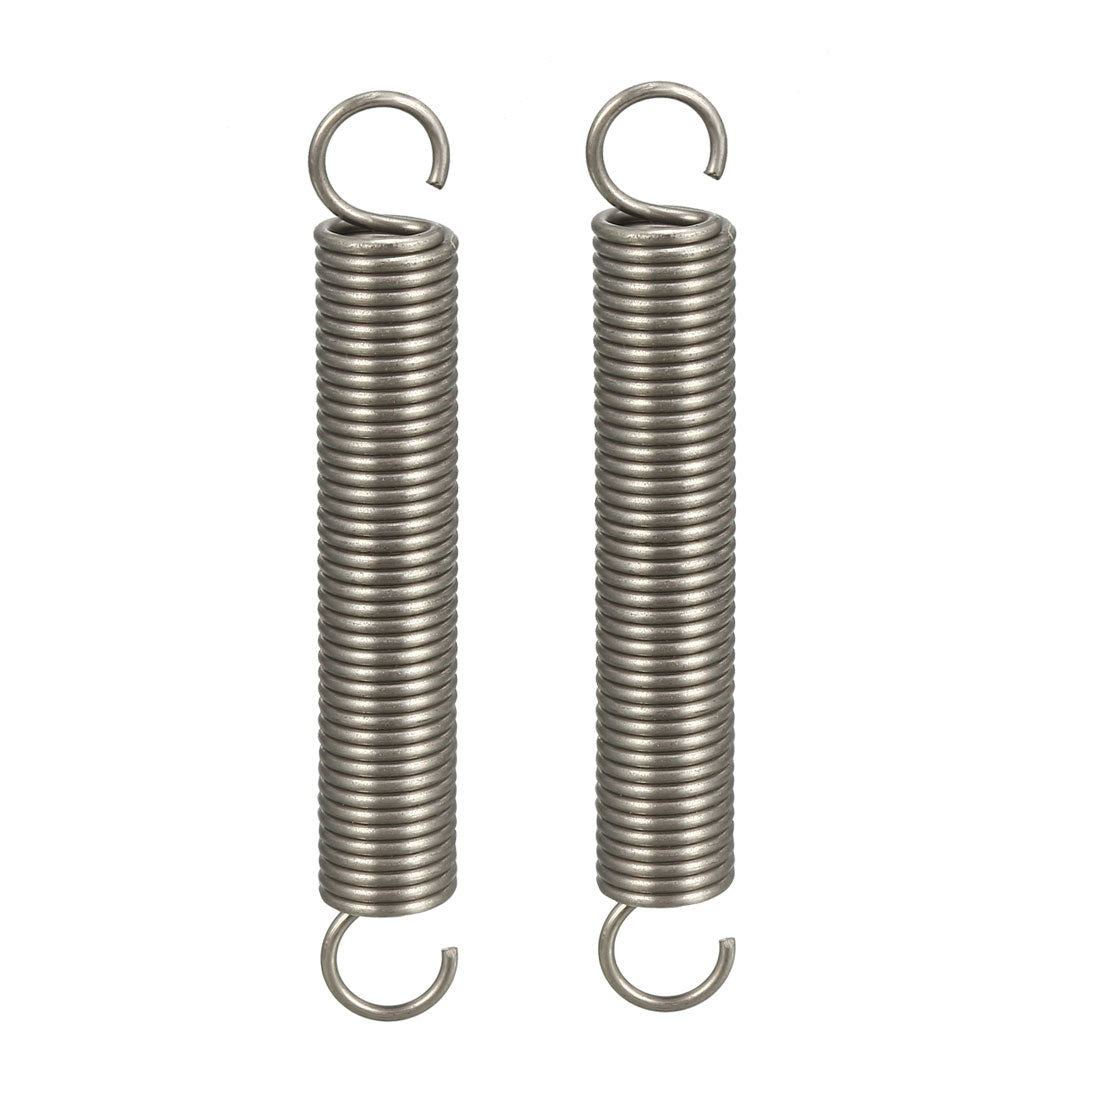 uxcell Uxcell Tension Spring Wire Diameter 0.047", OD 0.39", Free Length 2.76" 2pcs